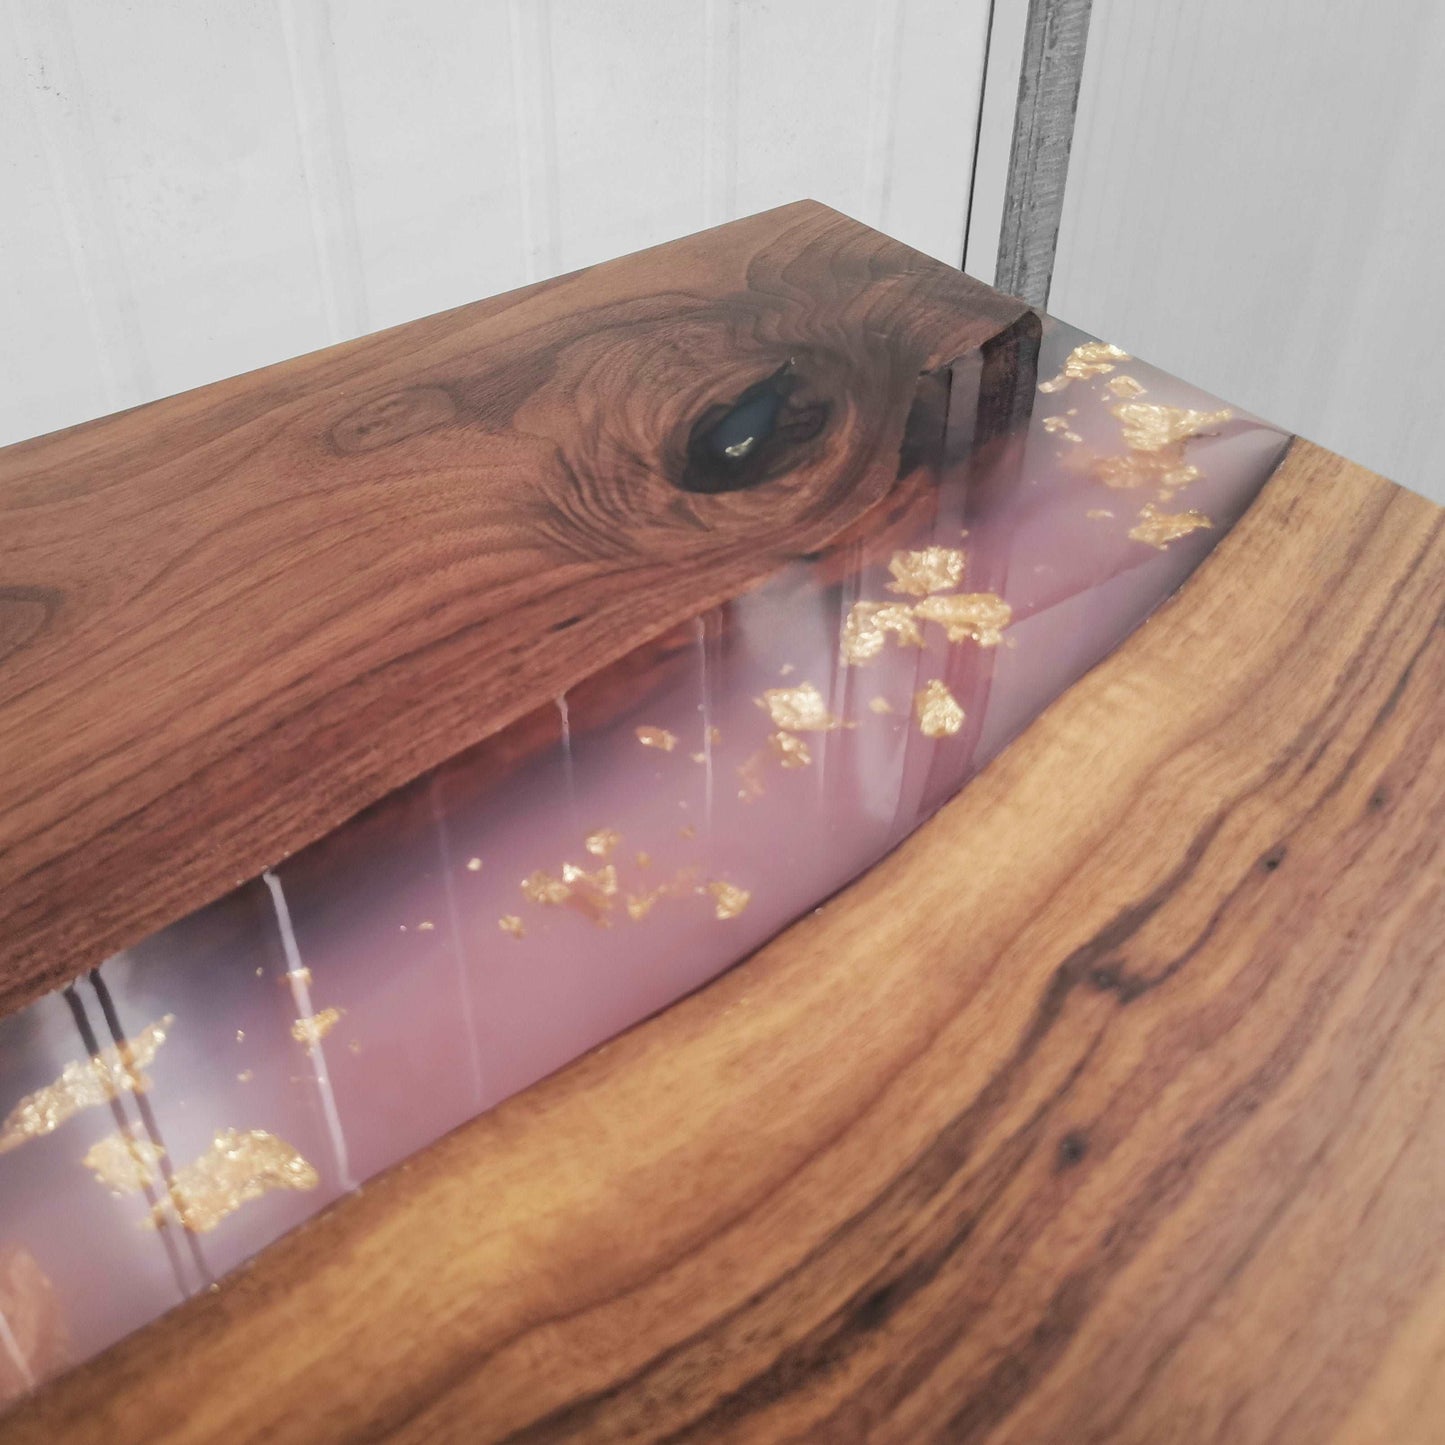 American blackwalnut  live edge dining table w/ pink epoxy resin and gold foil leaf free shipping - MOOKAFURNITURE